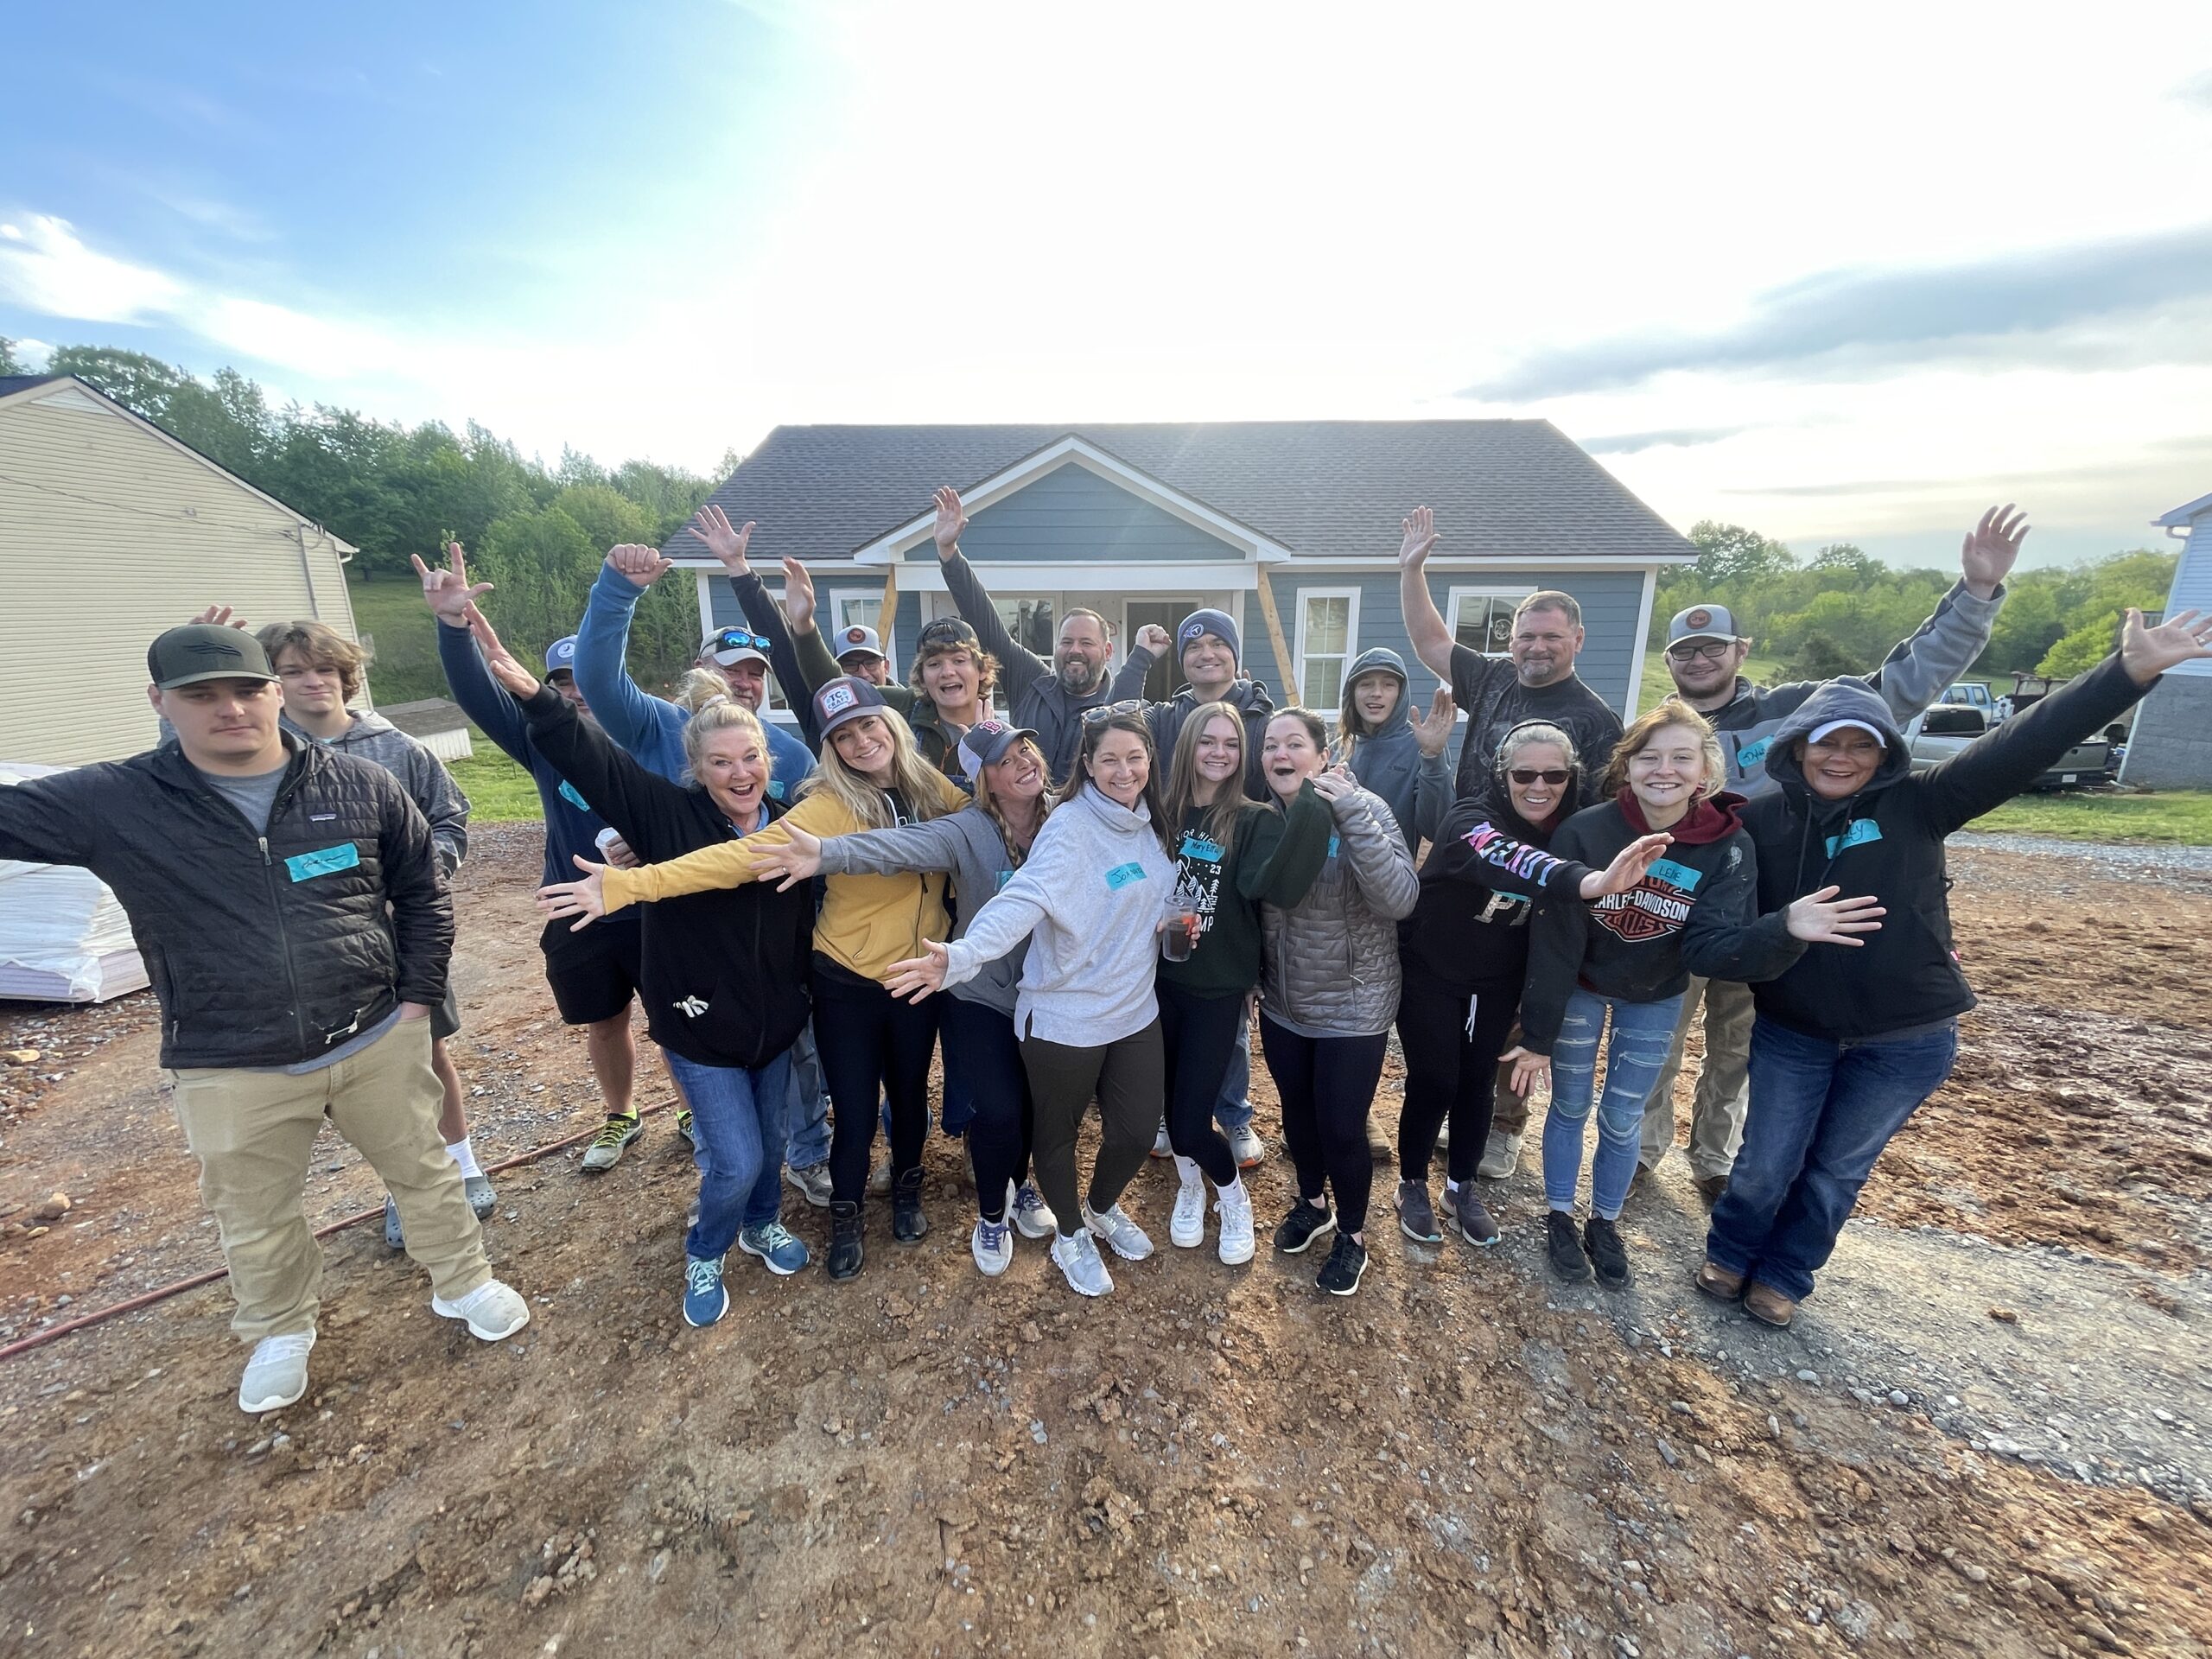 A Habitat for Humanity team in front of a house